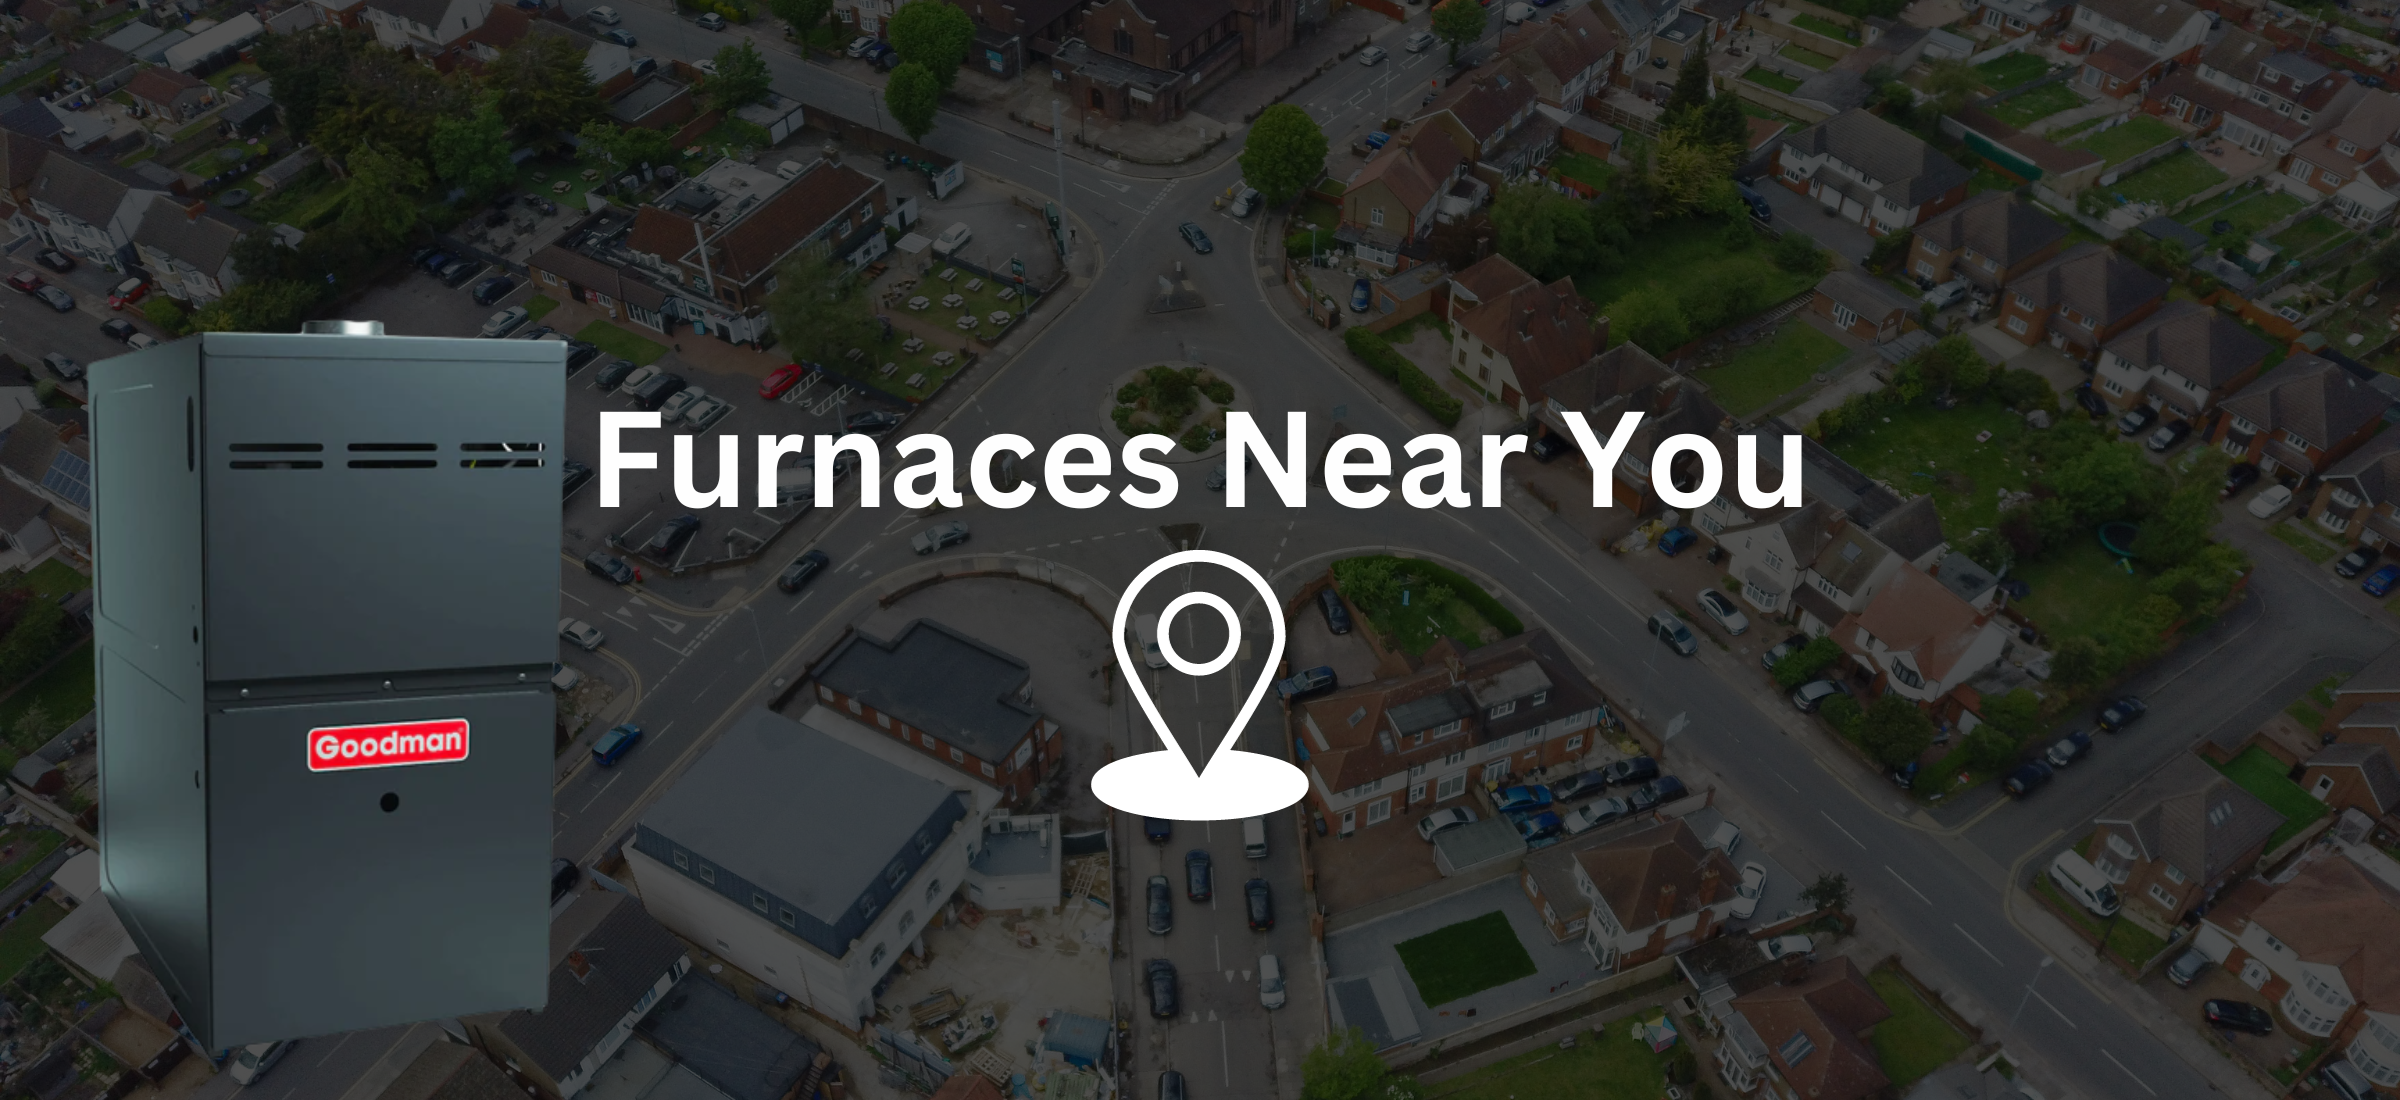 Furnaces Near You - Get It Quick